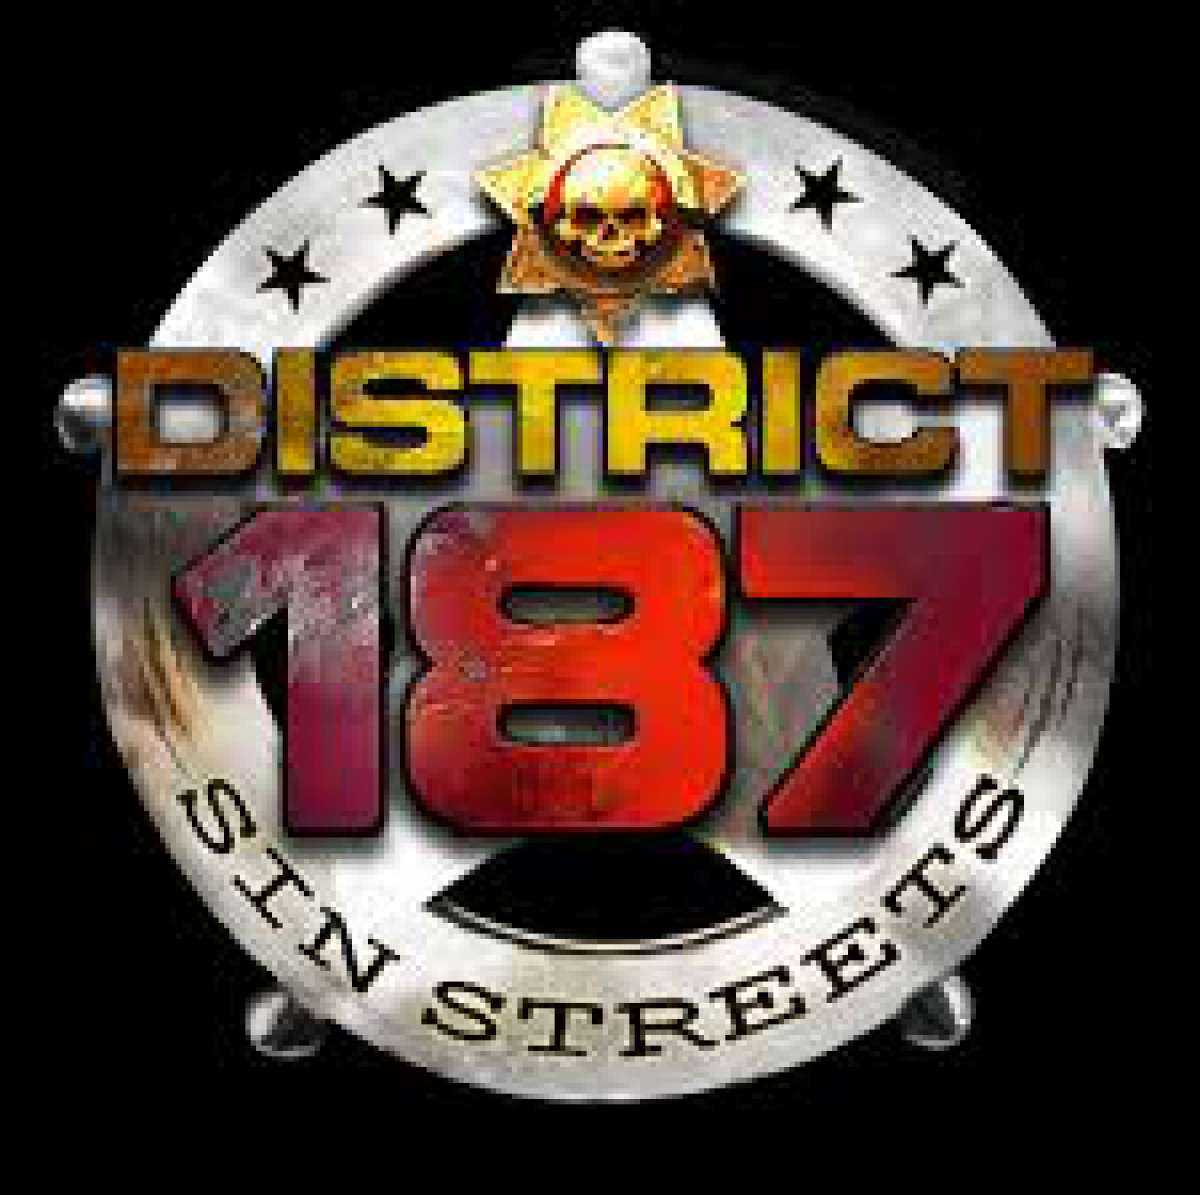 District 187: Sin Streets